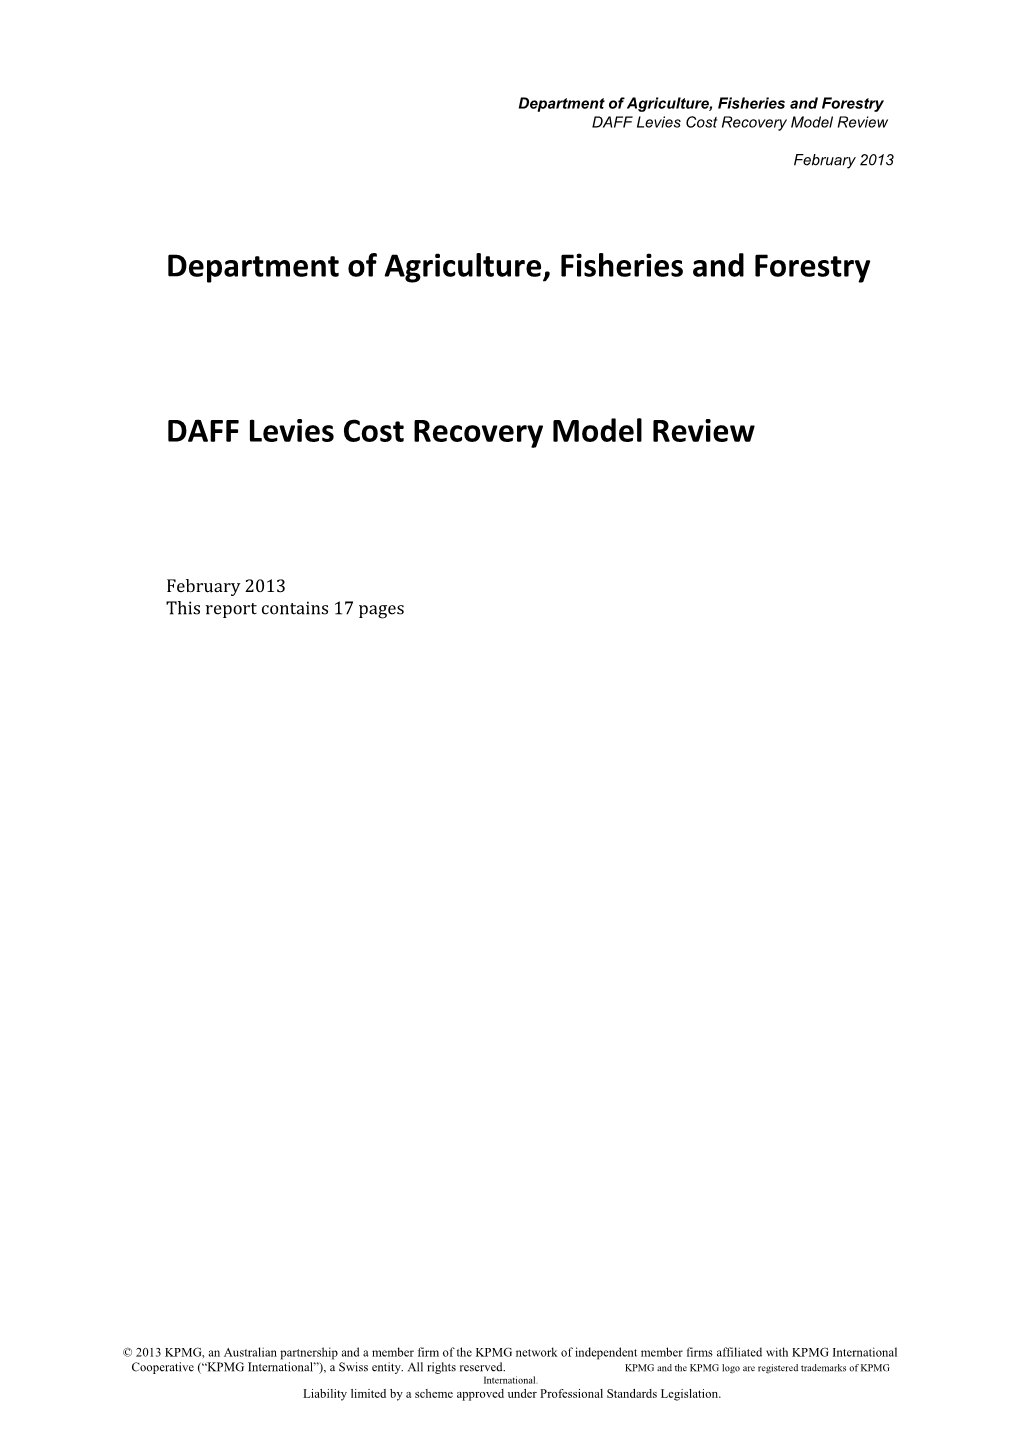 DAFF Levies Cost Recovery Model Review